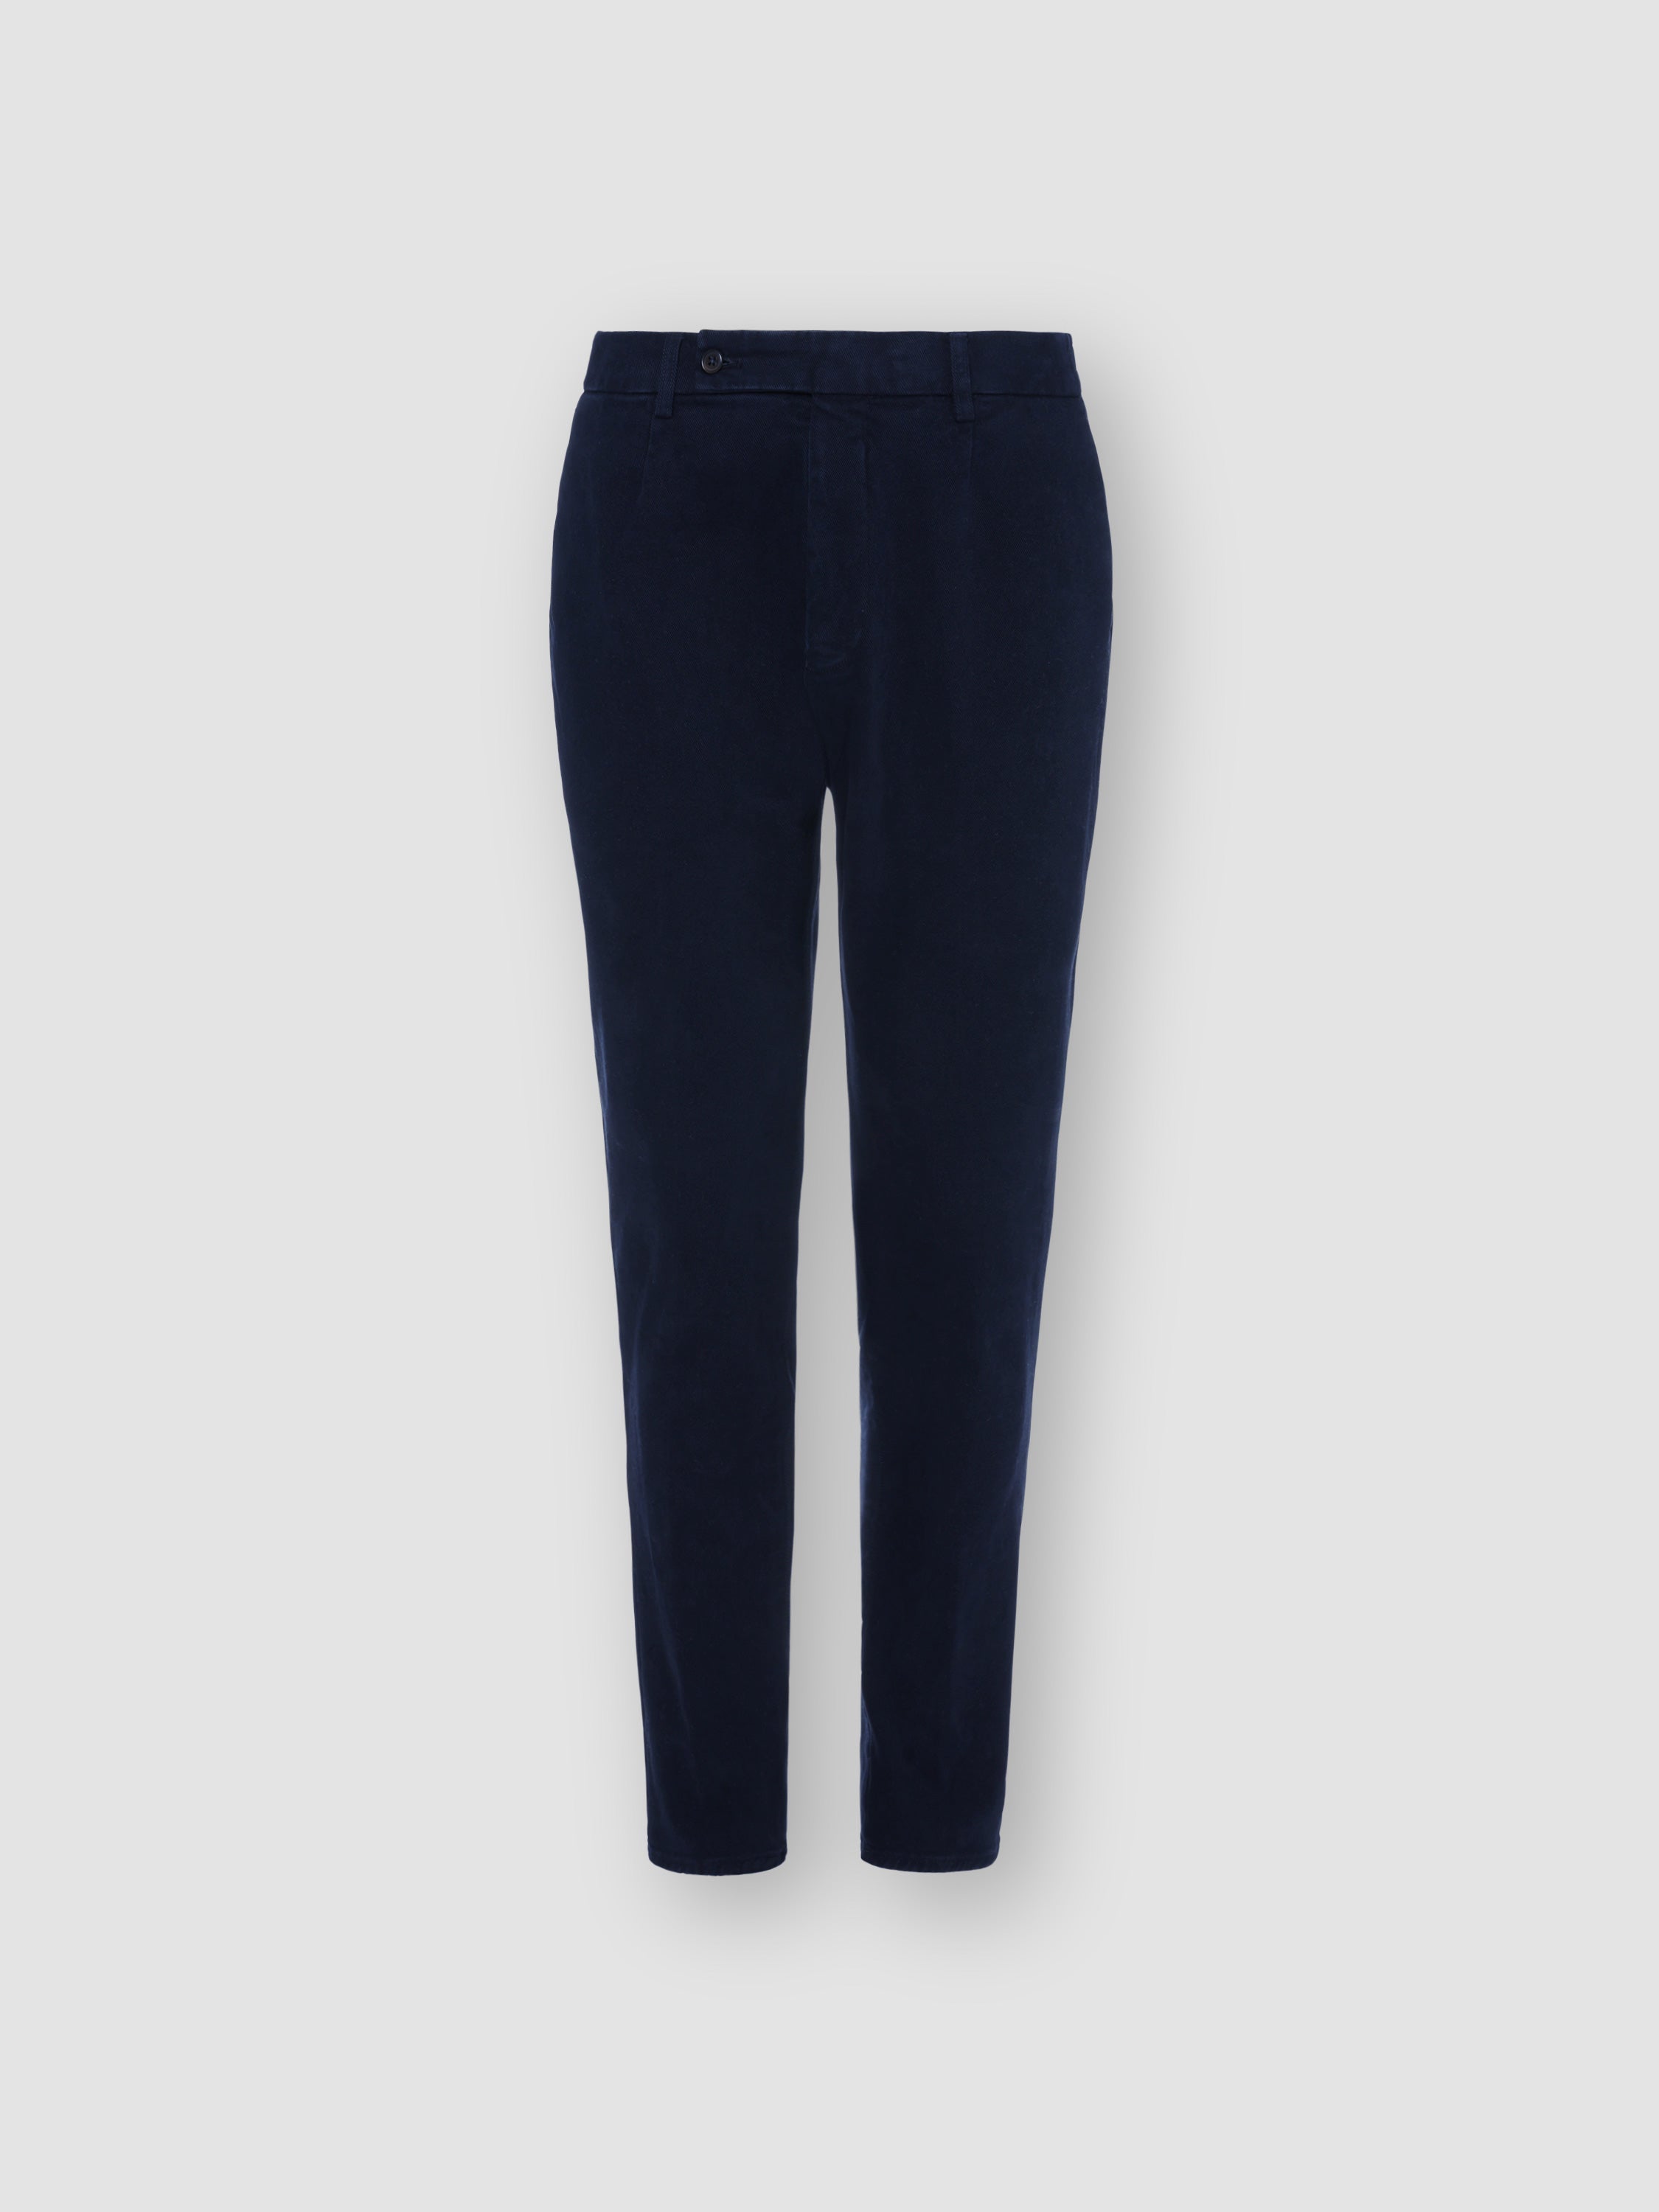 Cotton Easy Fit Chinos Navy Product Image